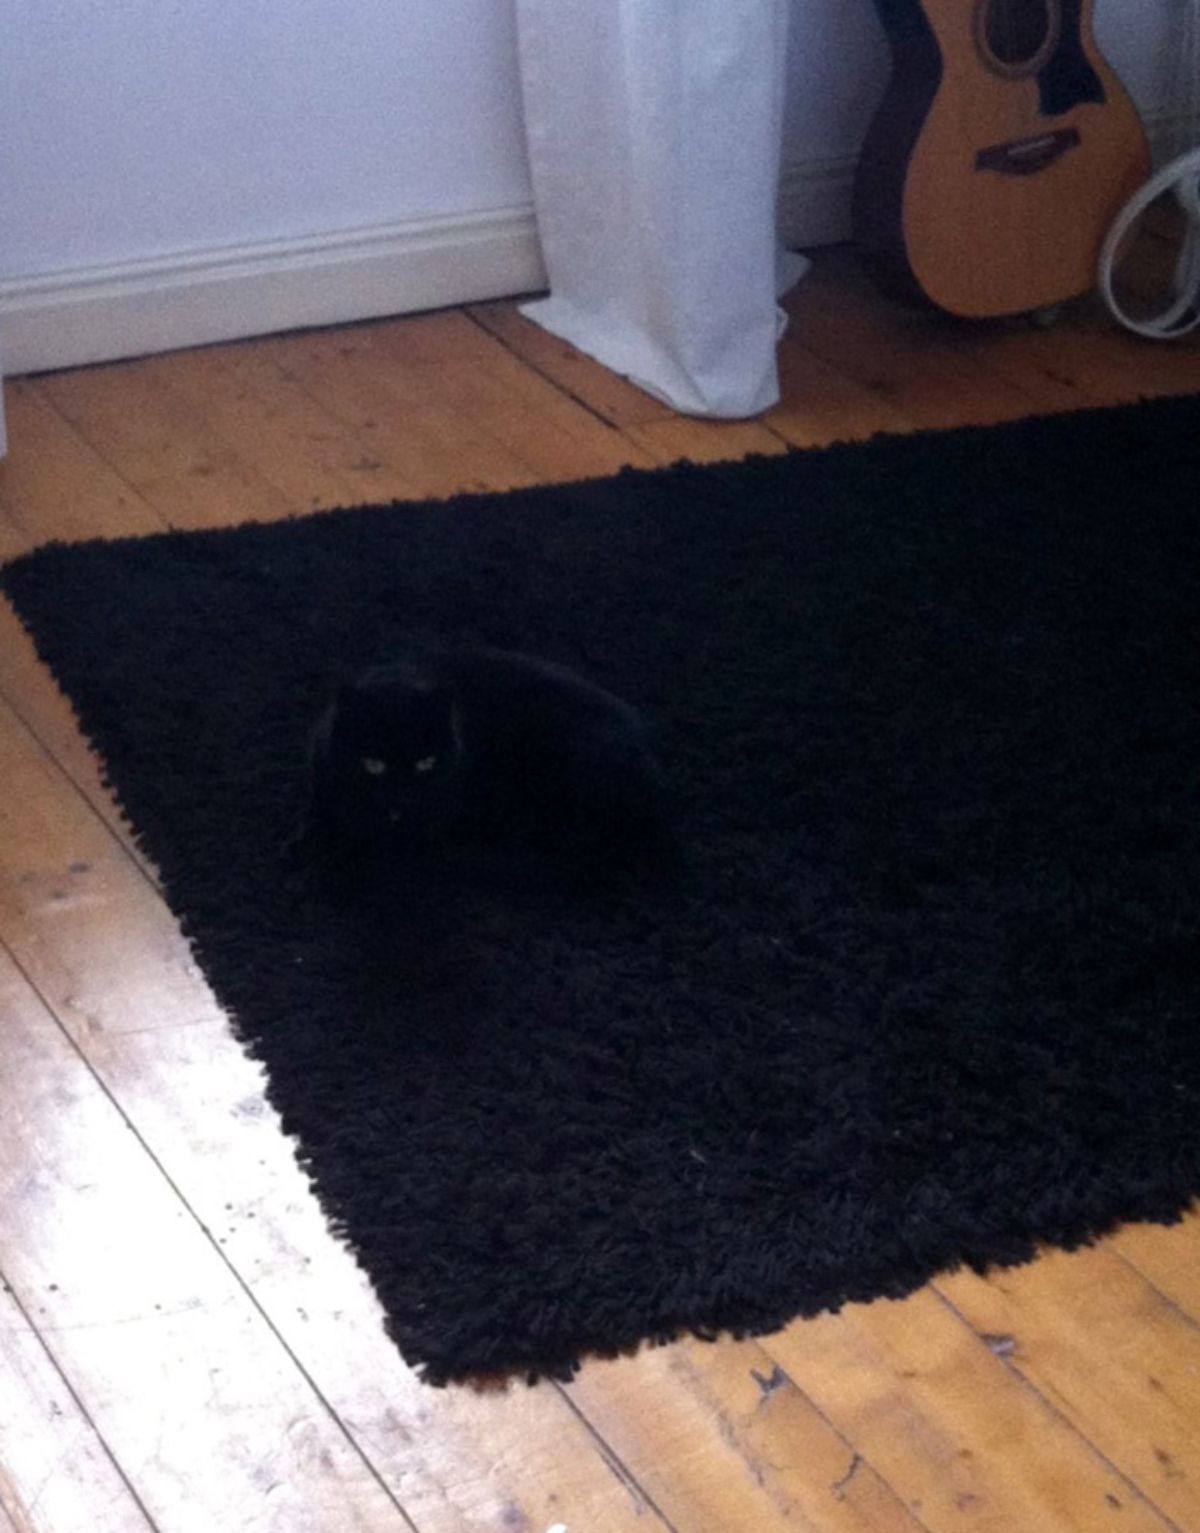 black cat laying on a black fluffy rug